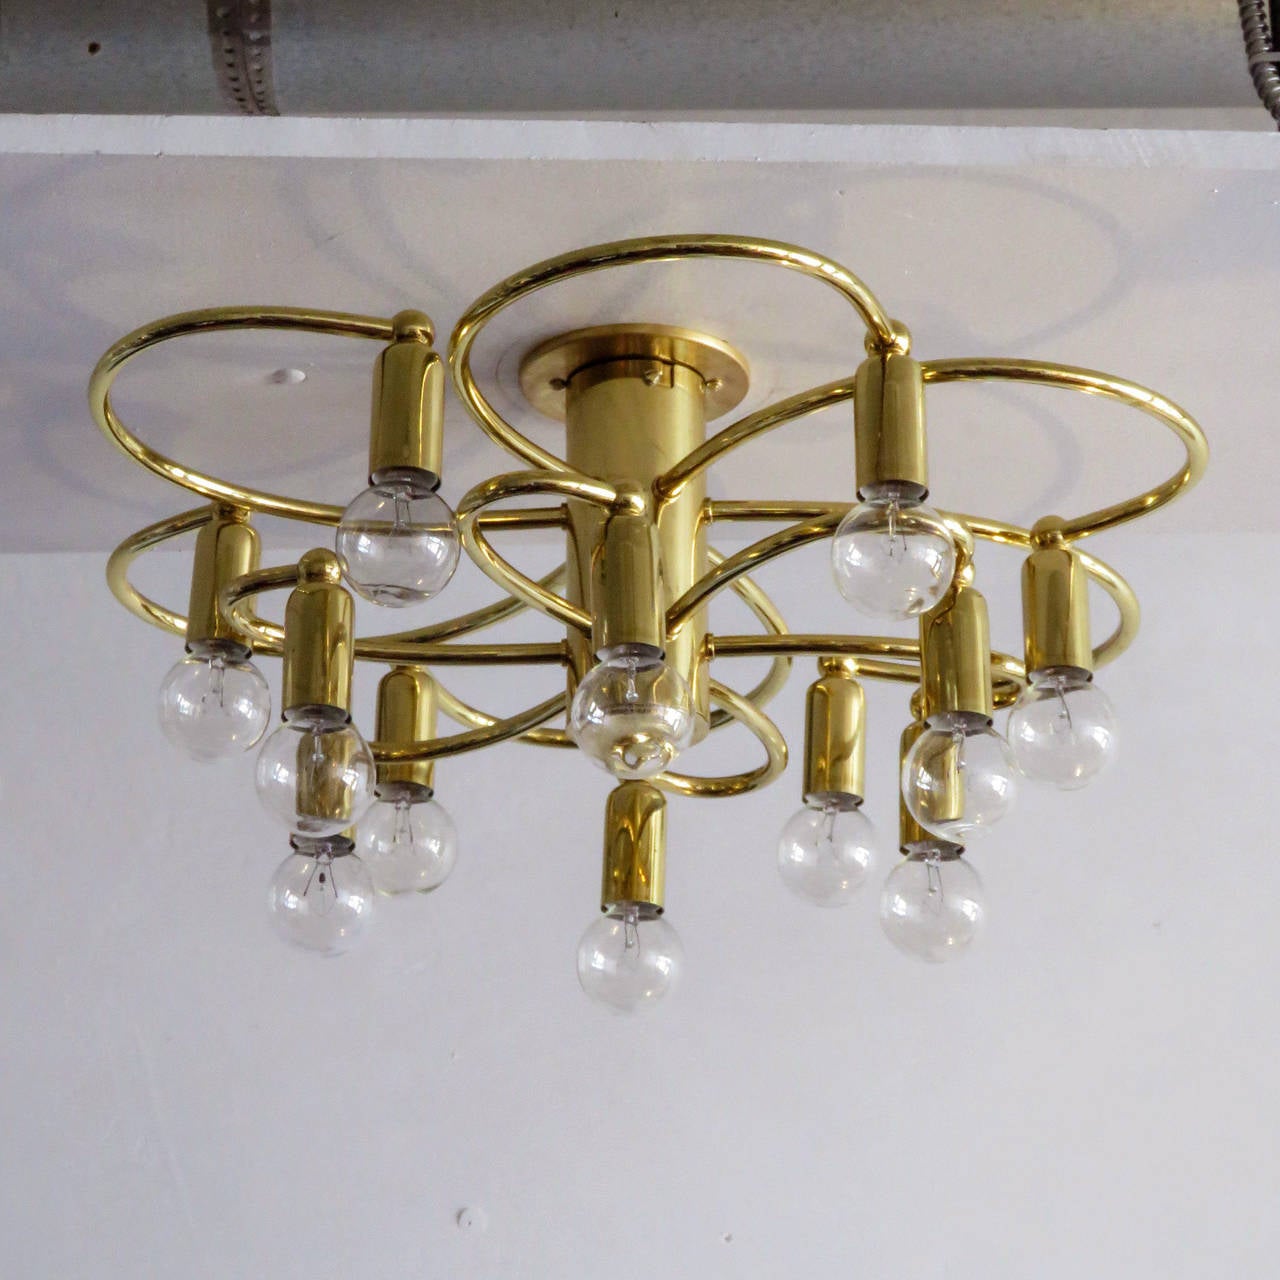 Stunning brass twelve-light flush mount ceiling light by Honsel Germany with two tiers of six organically shaped arms, with a total of 12 sockets total, can be used as wall sconce as well.